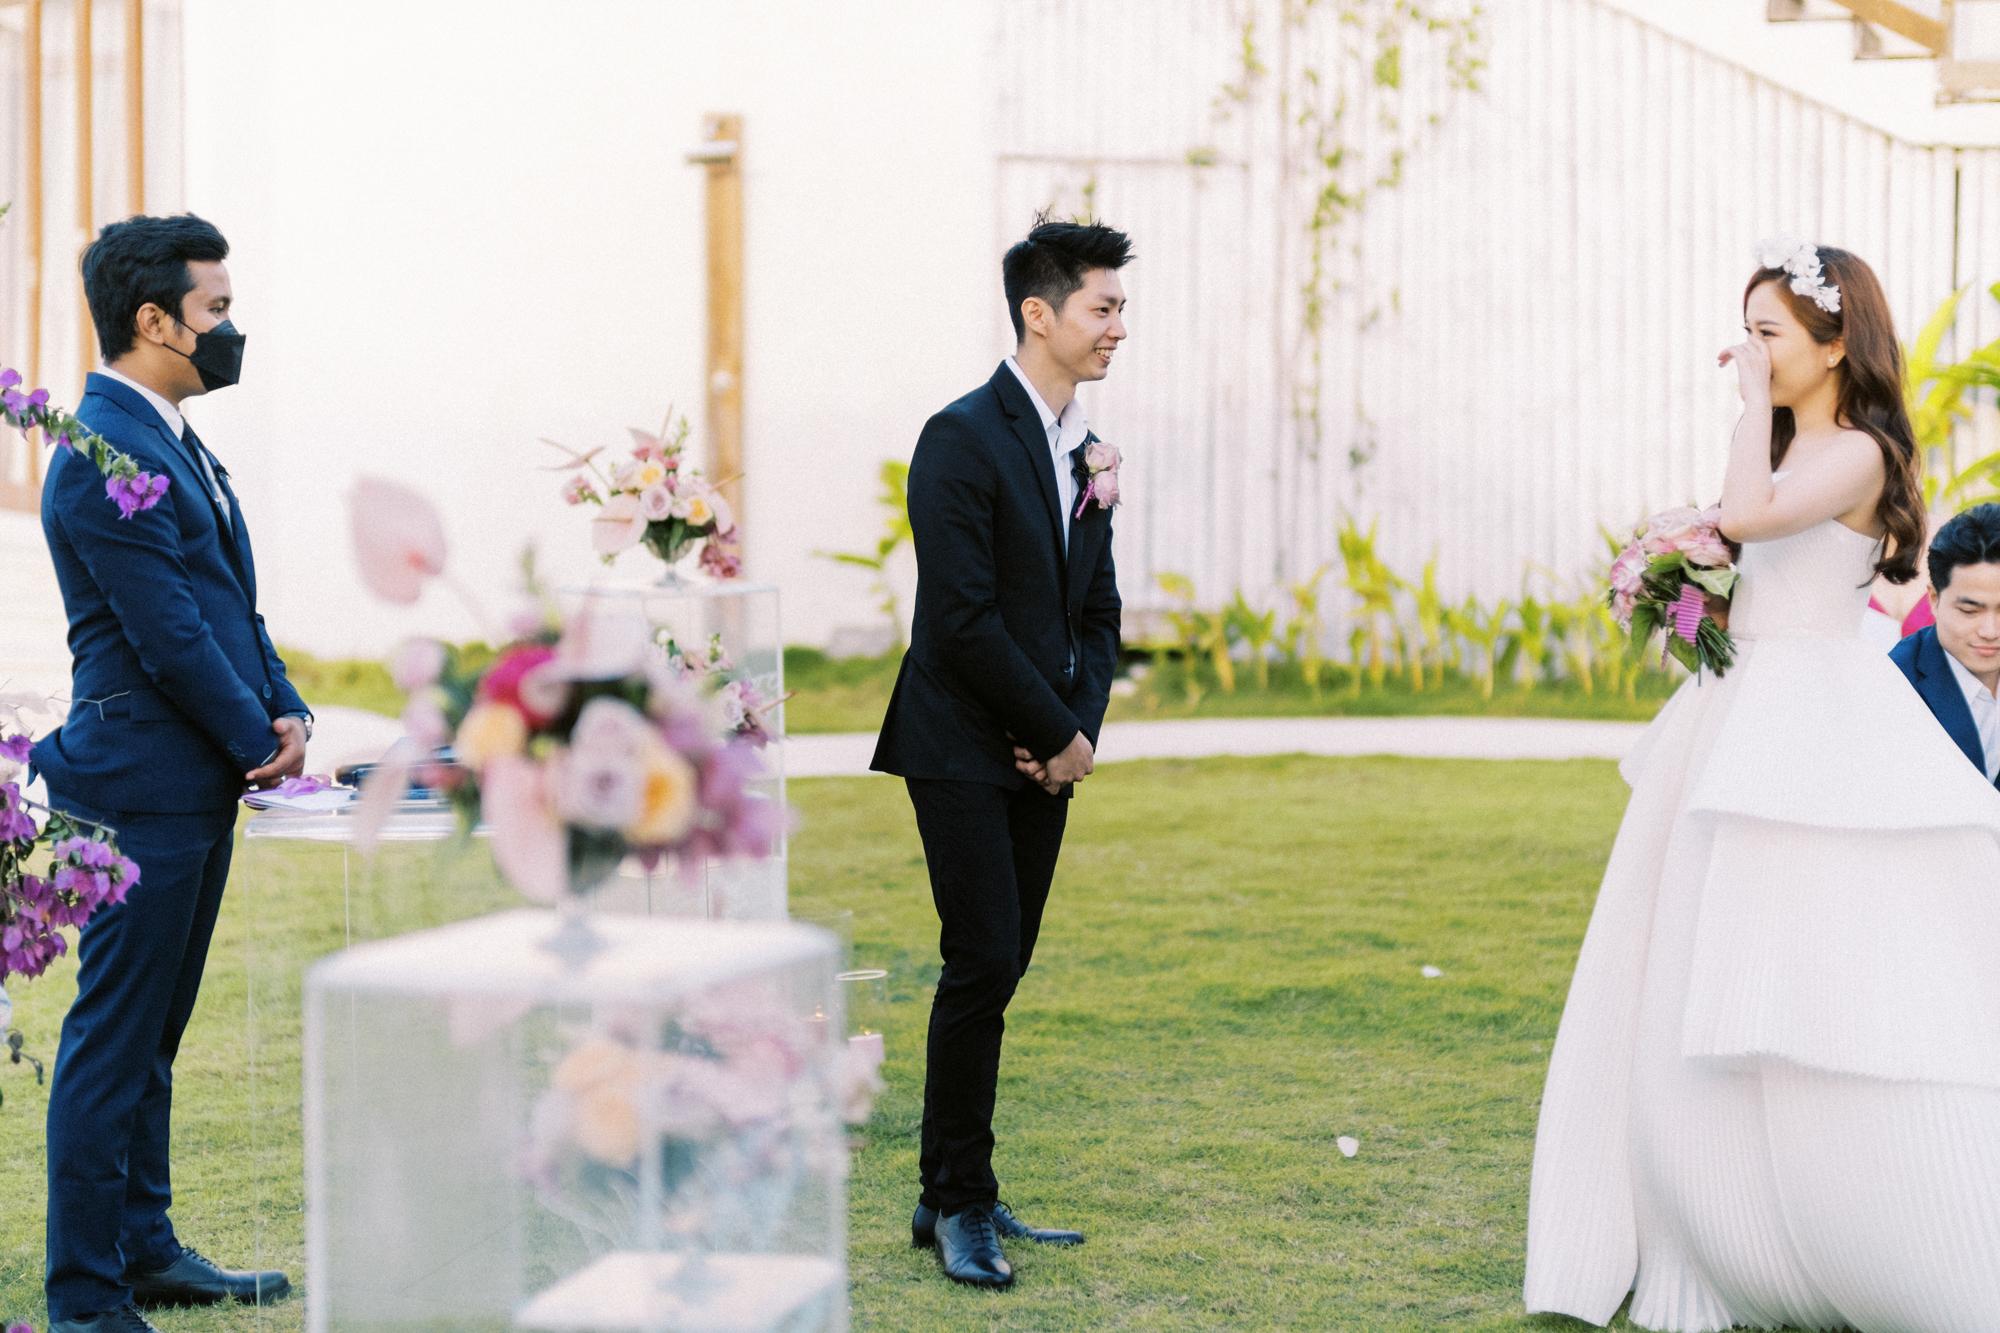 A Dreamy Destination Wedding on a Cliff Front in Bali Adorned in an Array of Pinks!